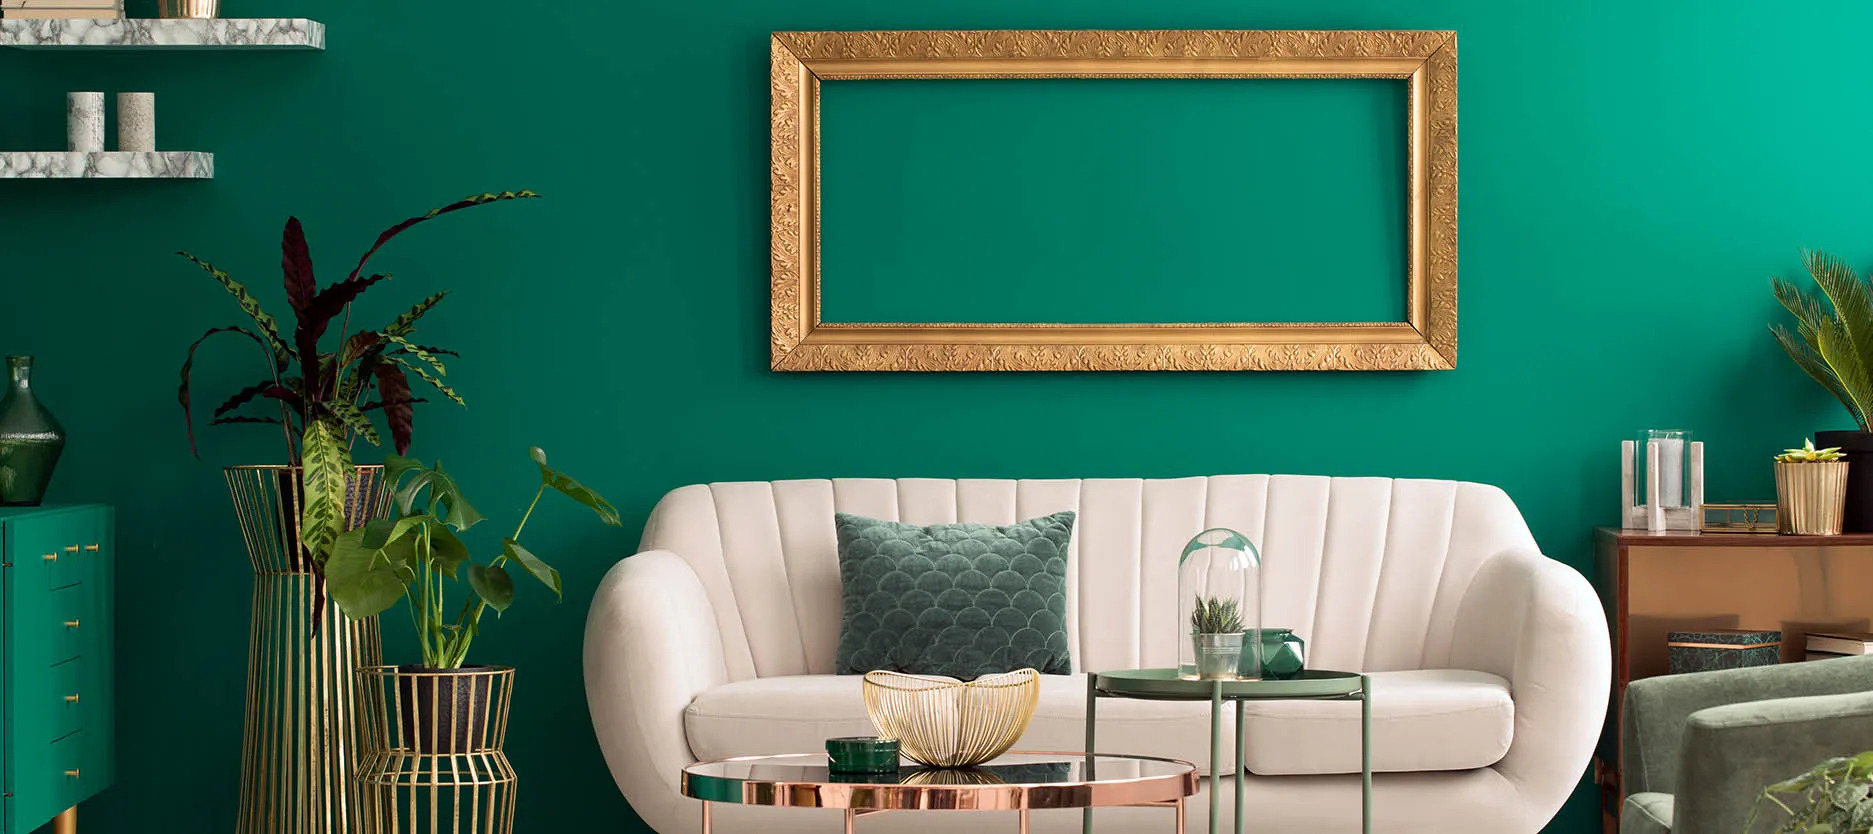 Sea Green and Gold: Colour combination for walls